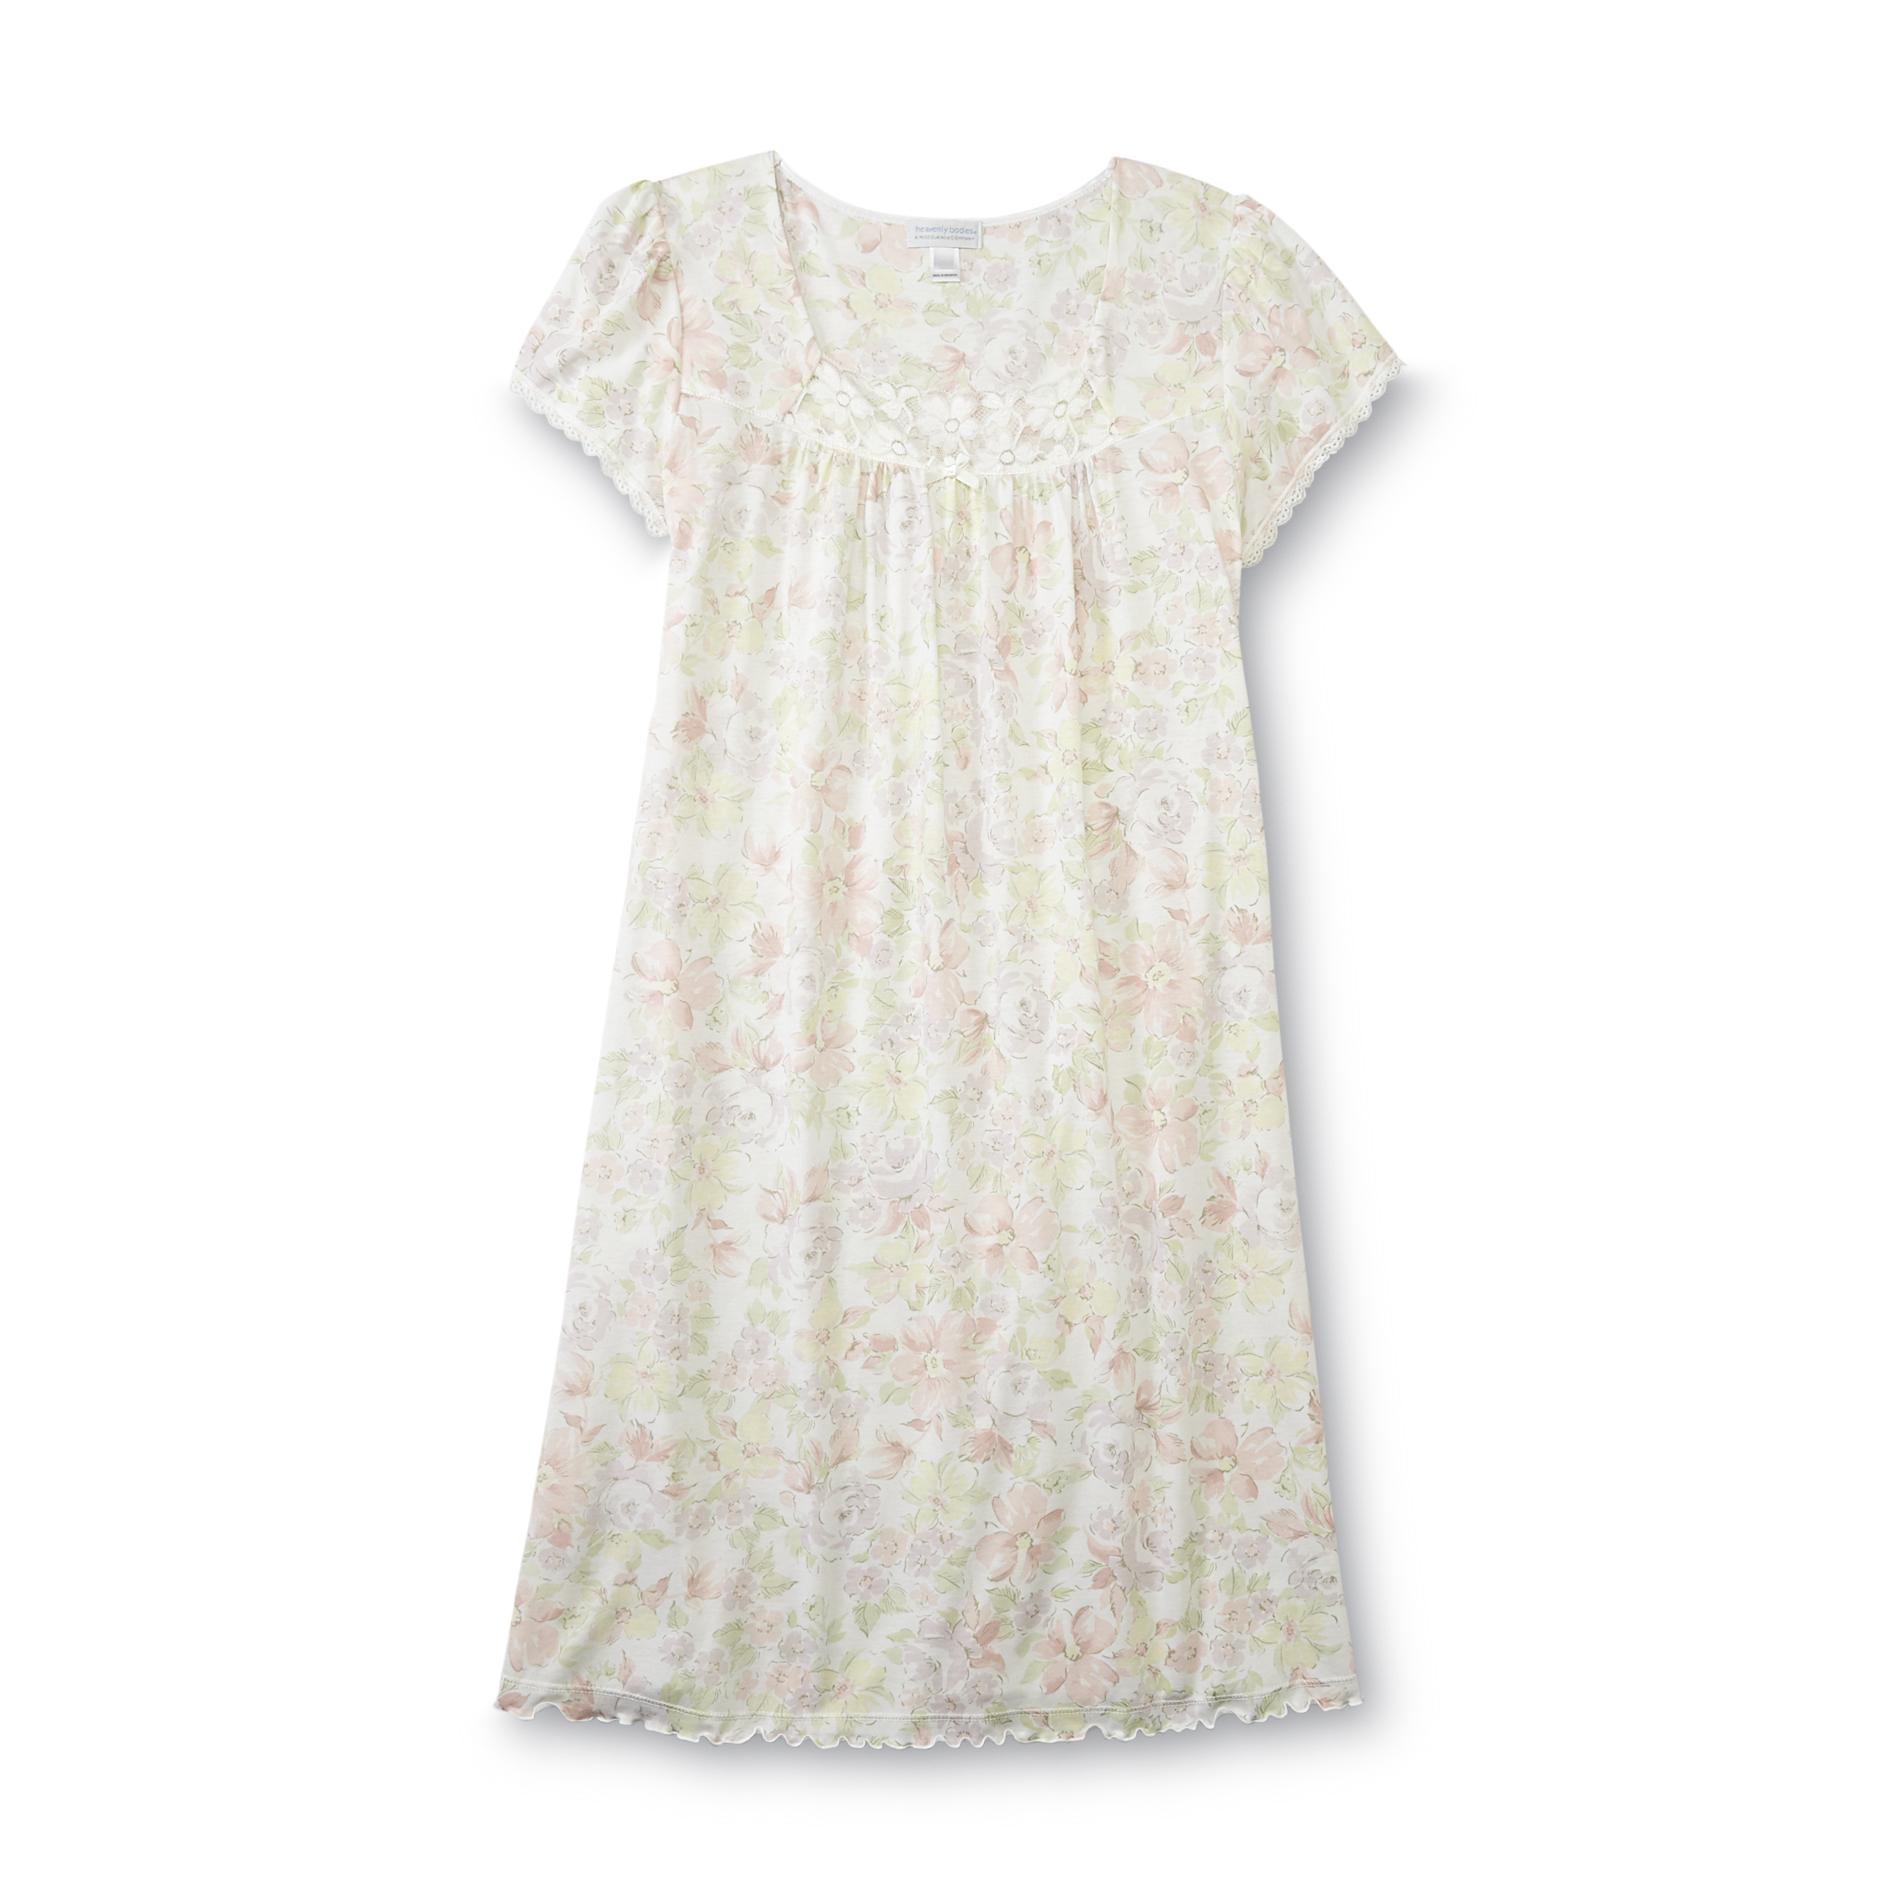 Heavenly Bodies by Miss Elaine Women's Plus Nightgown - Floral